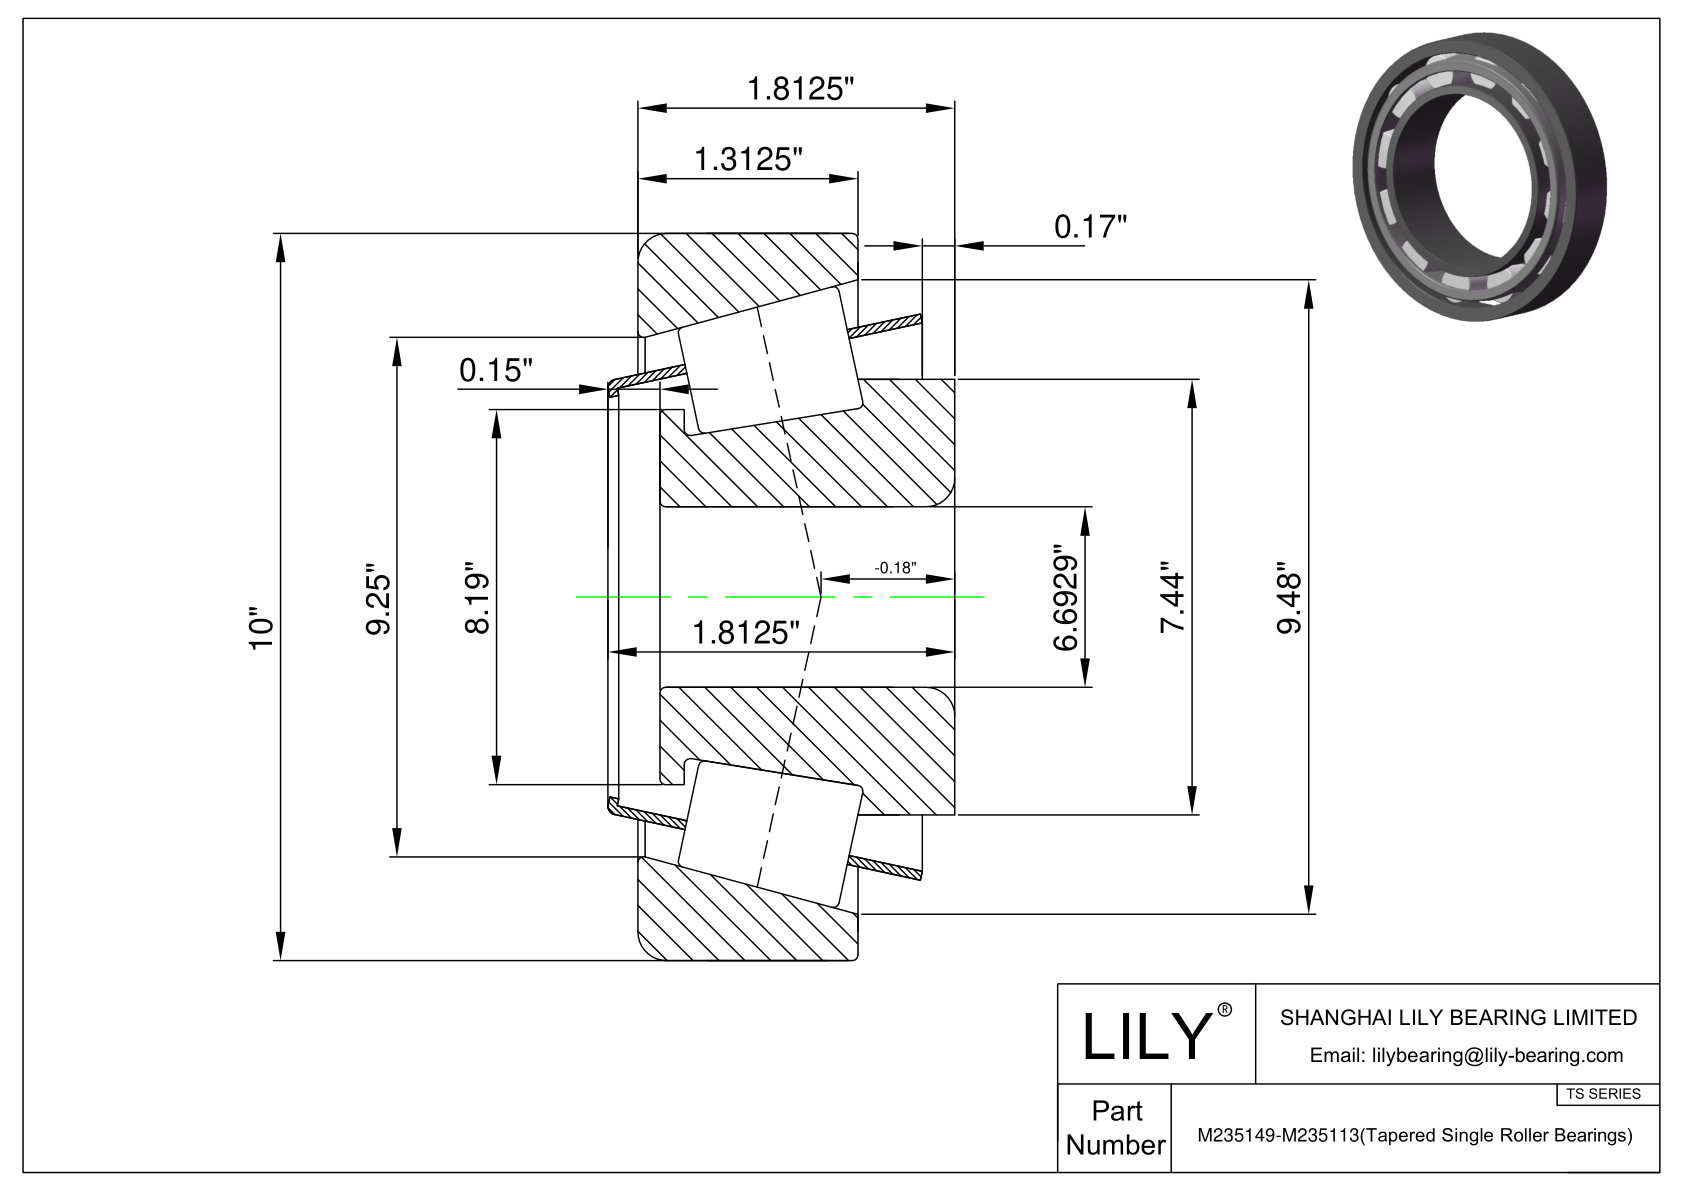 M235149-M235113 TS (Tapered Single Roller Bearings) (Imperial) cad drawing